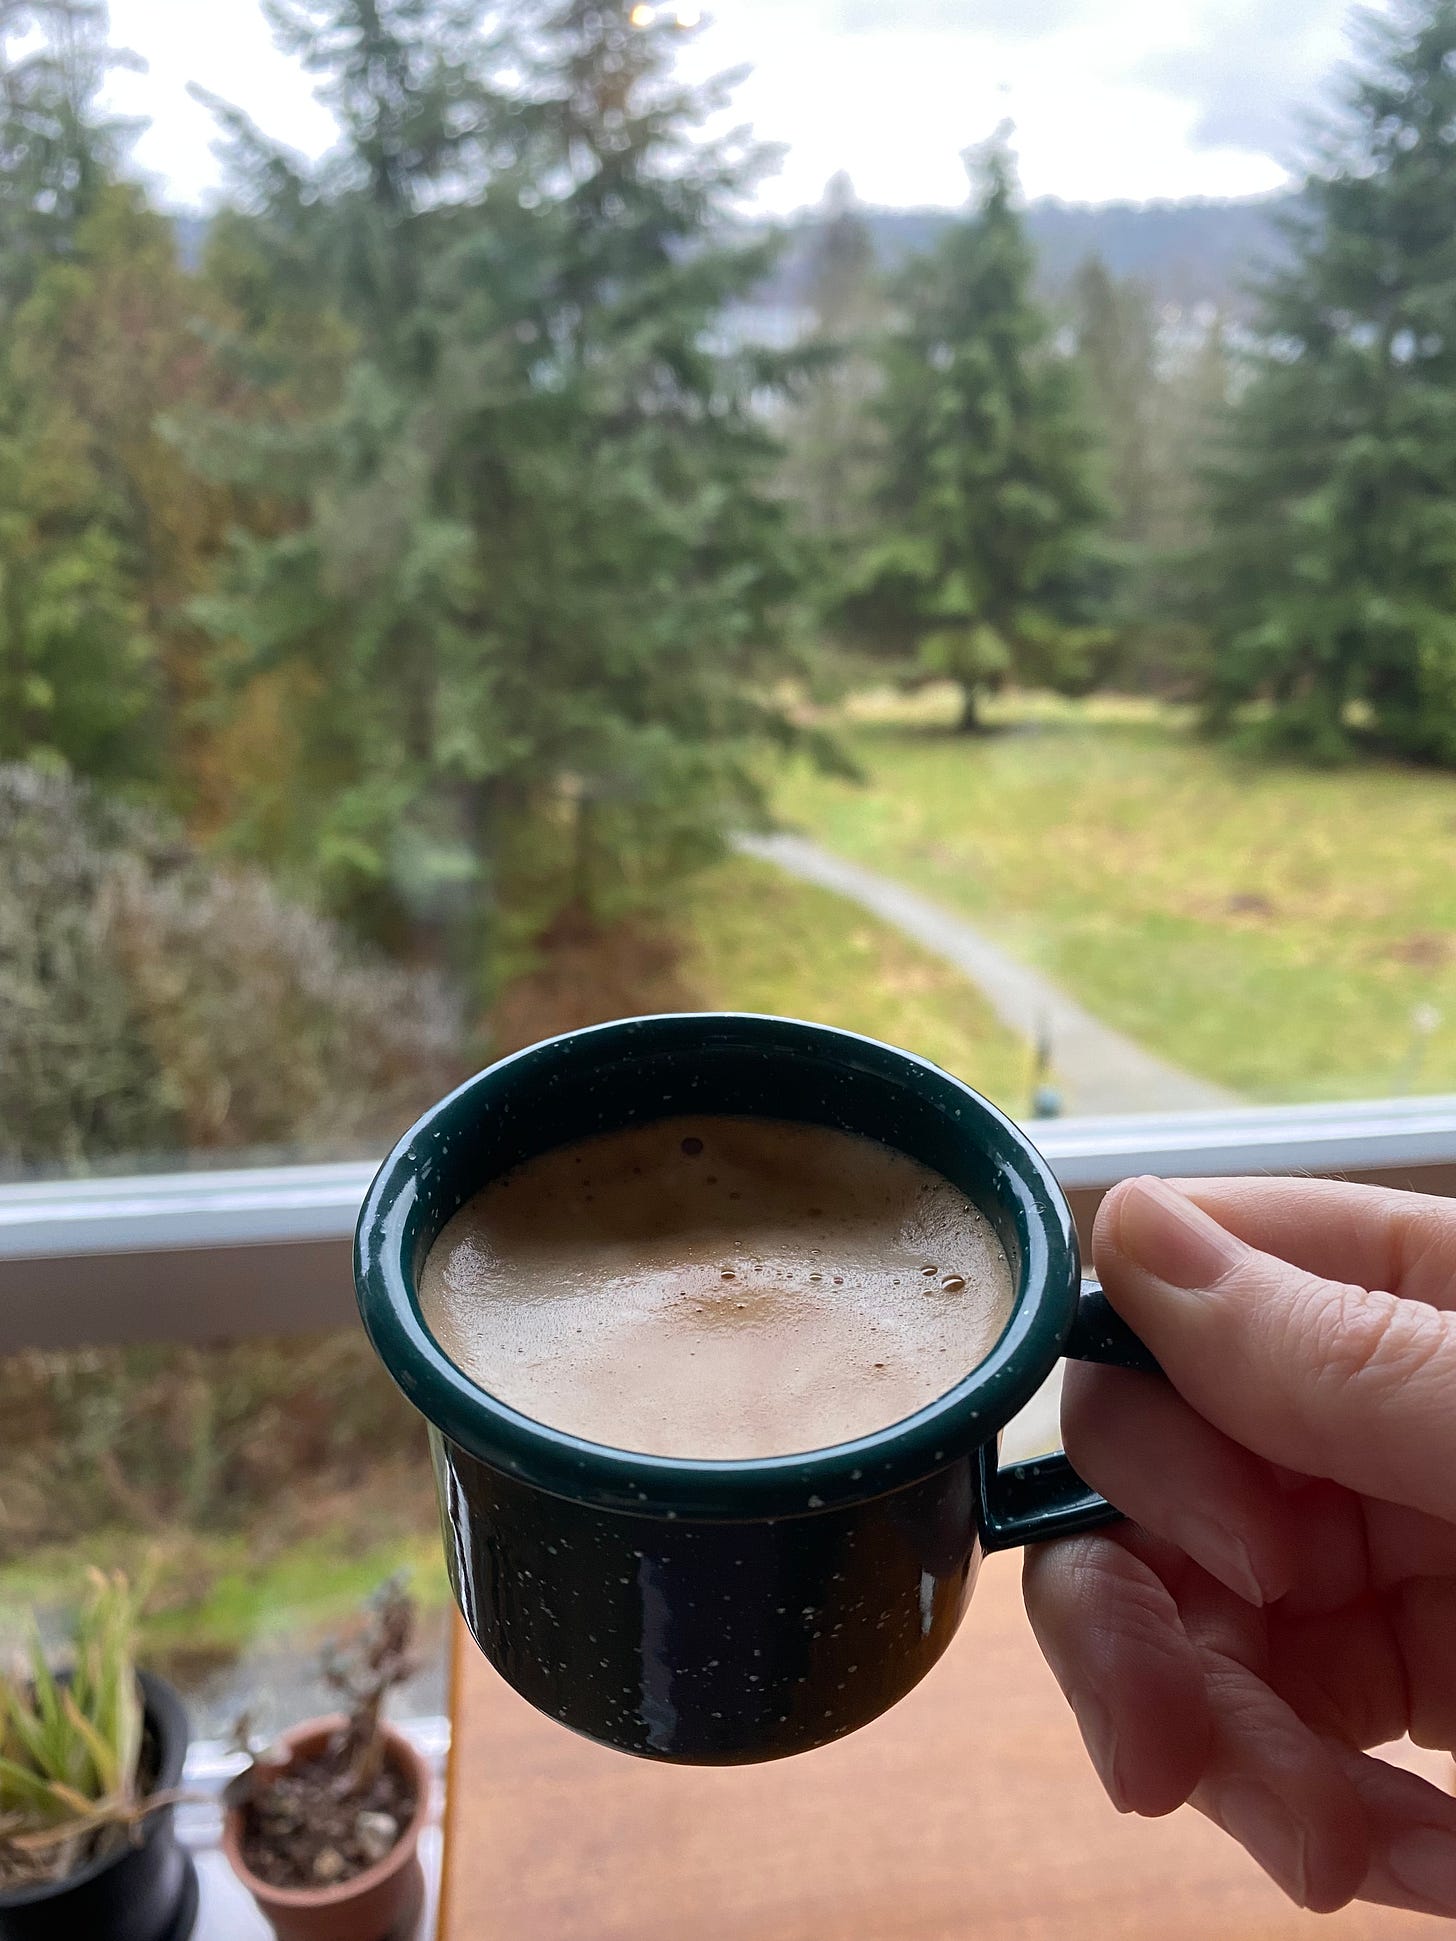 A green enamel espresso cup, the type of cup people take camping. I'm holding it by the handle with my finger and thumb in front of the dining table, and in the background you can see the trees in the park out the window.